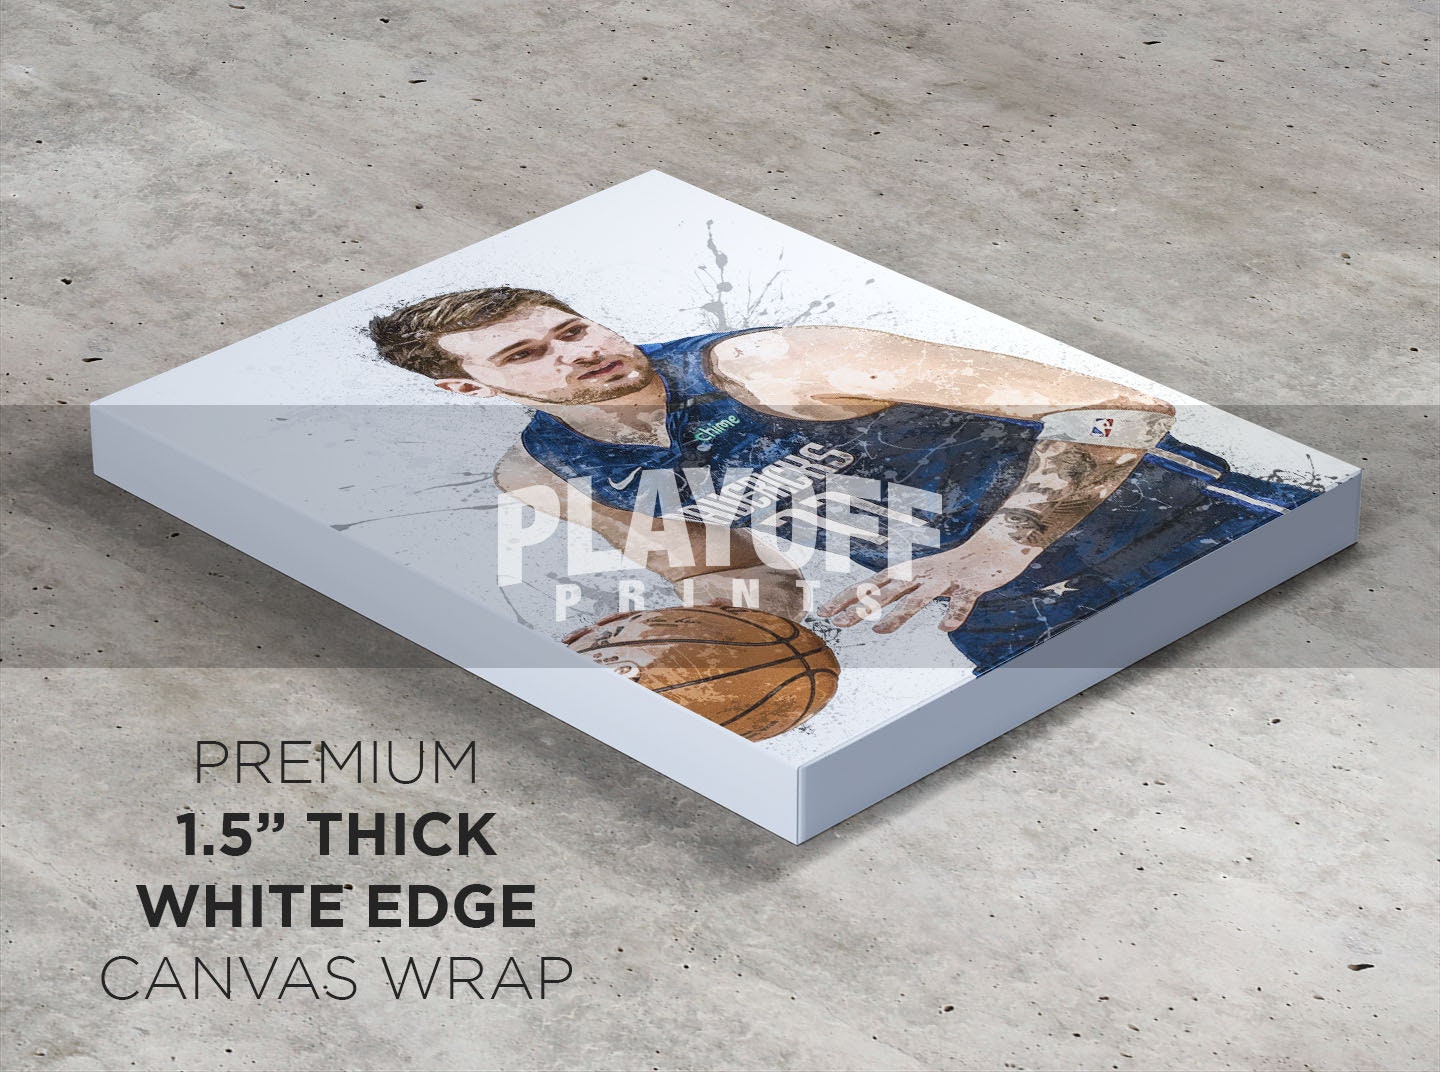 Luka Doncic - The Wonder Boy Poster for Sale by PennyandPeace